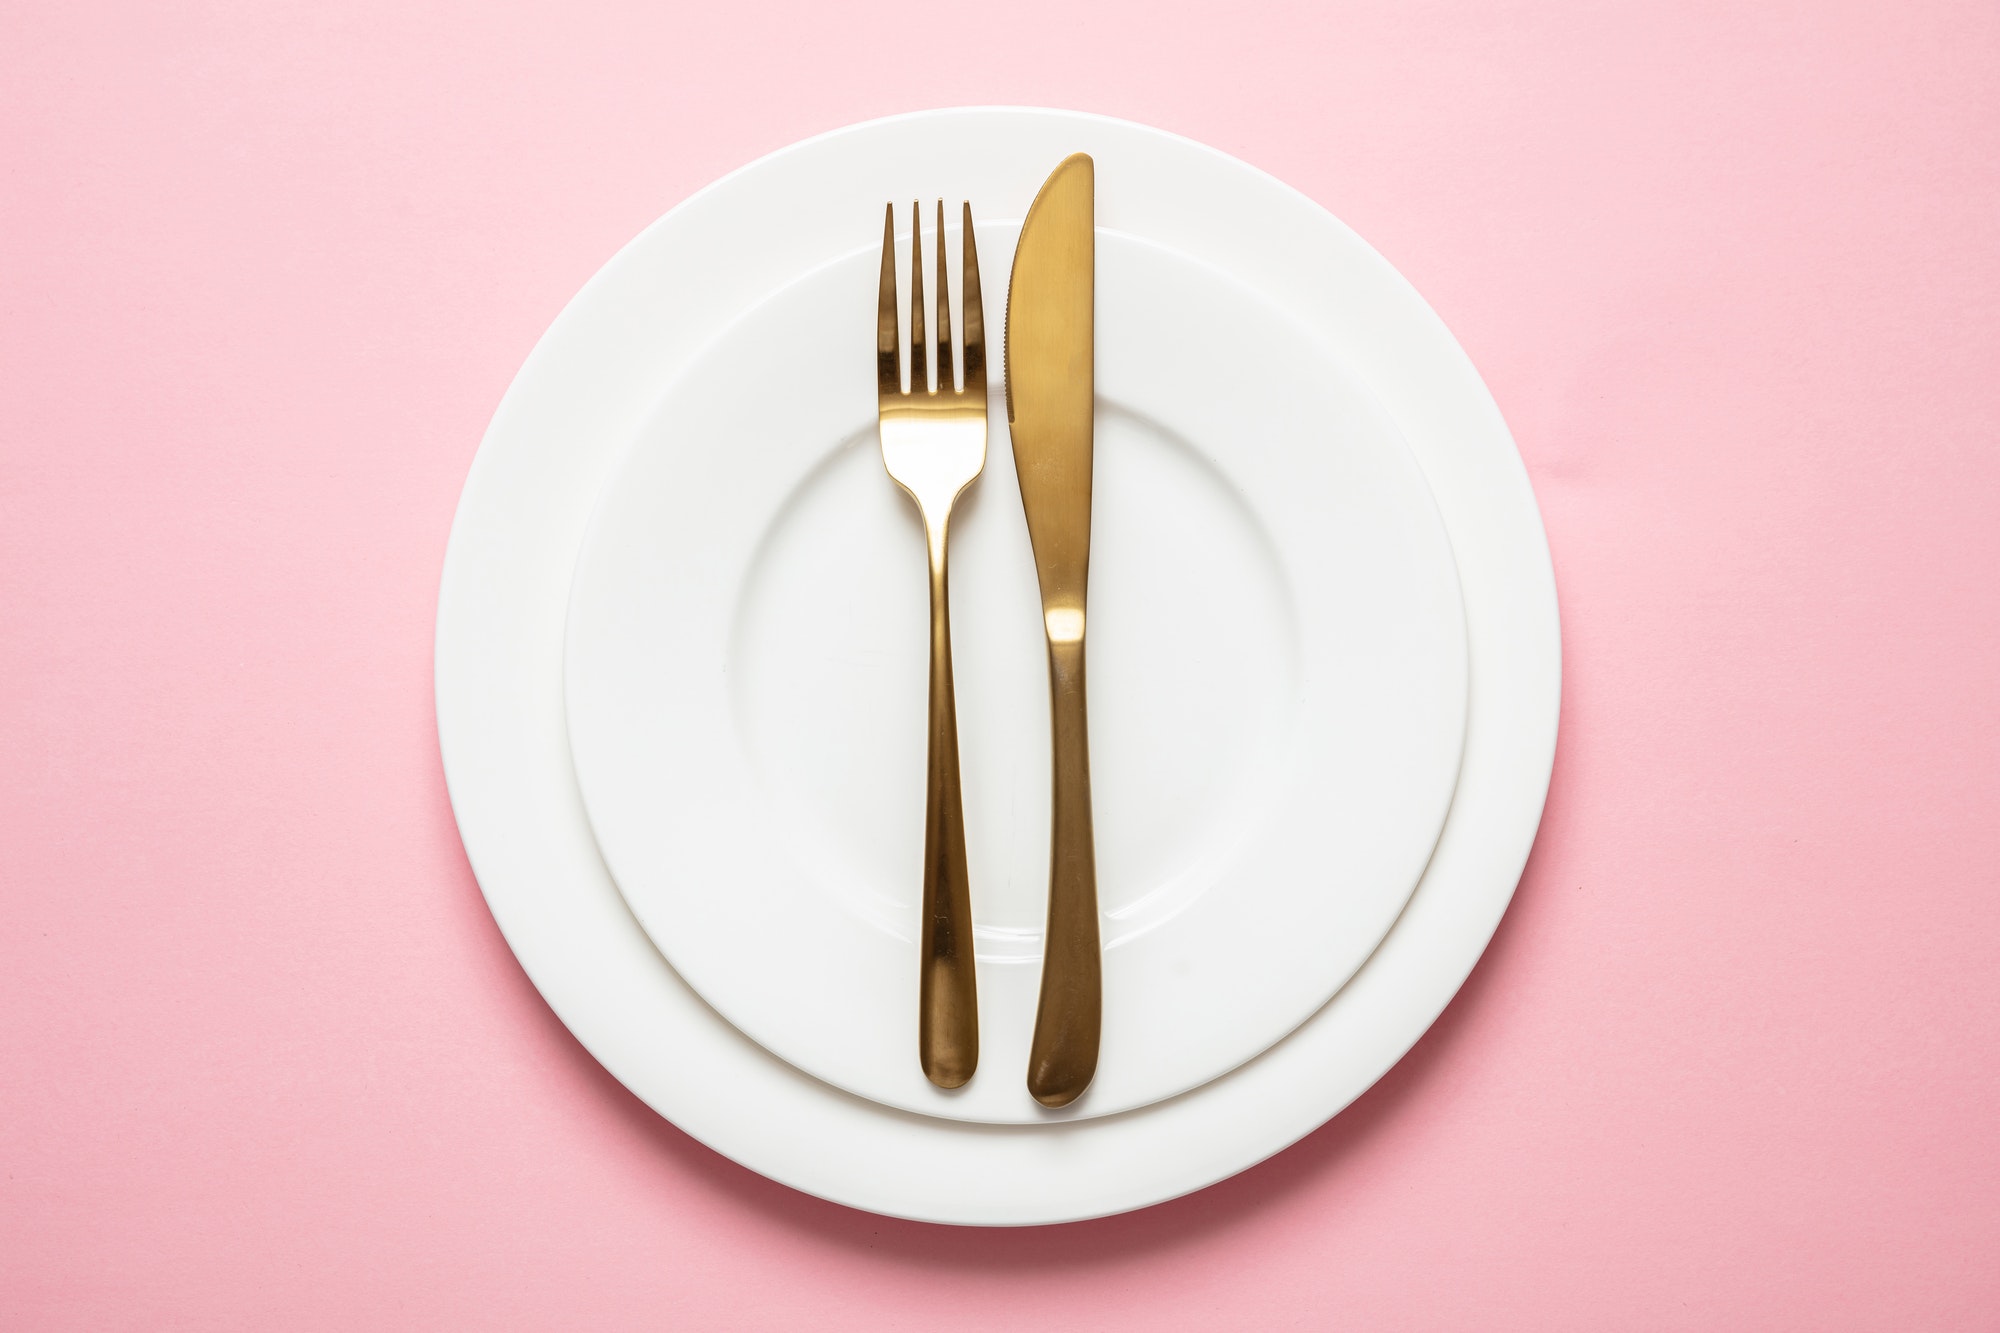 Gold cutlery and dishes set against pink background, formal place setting